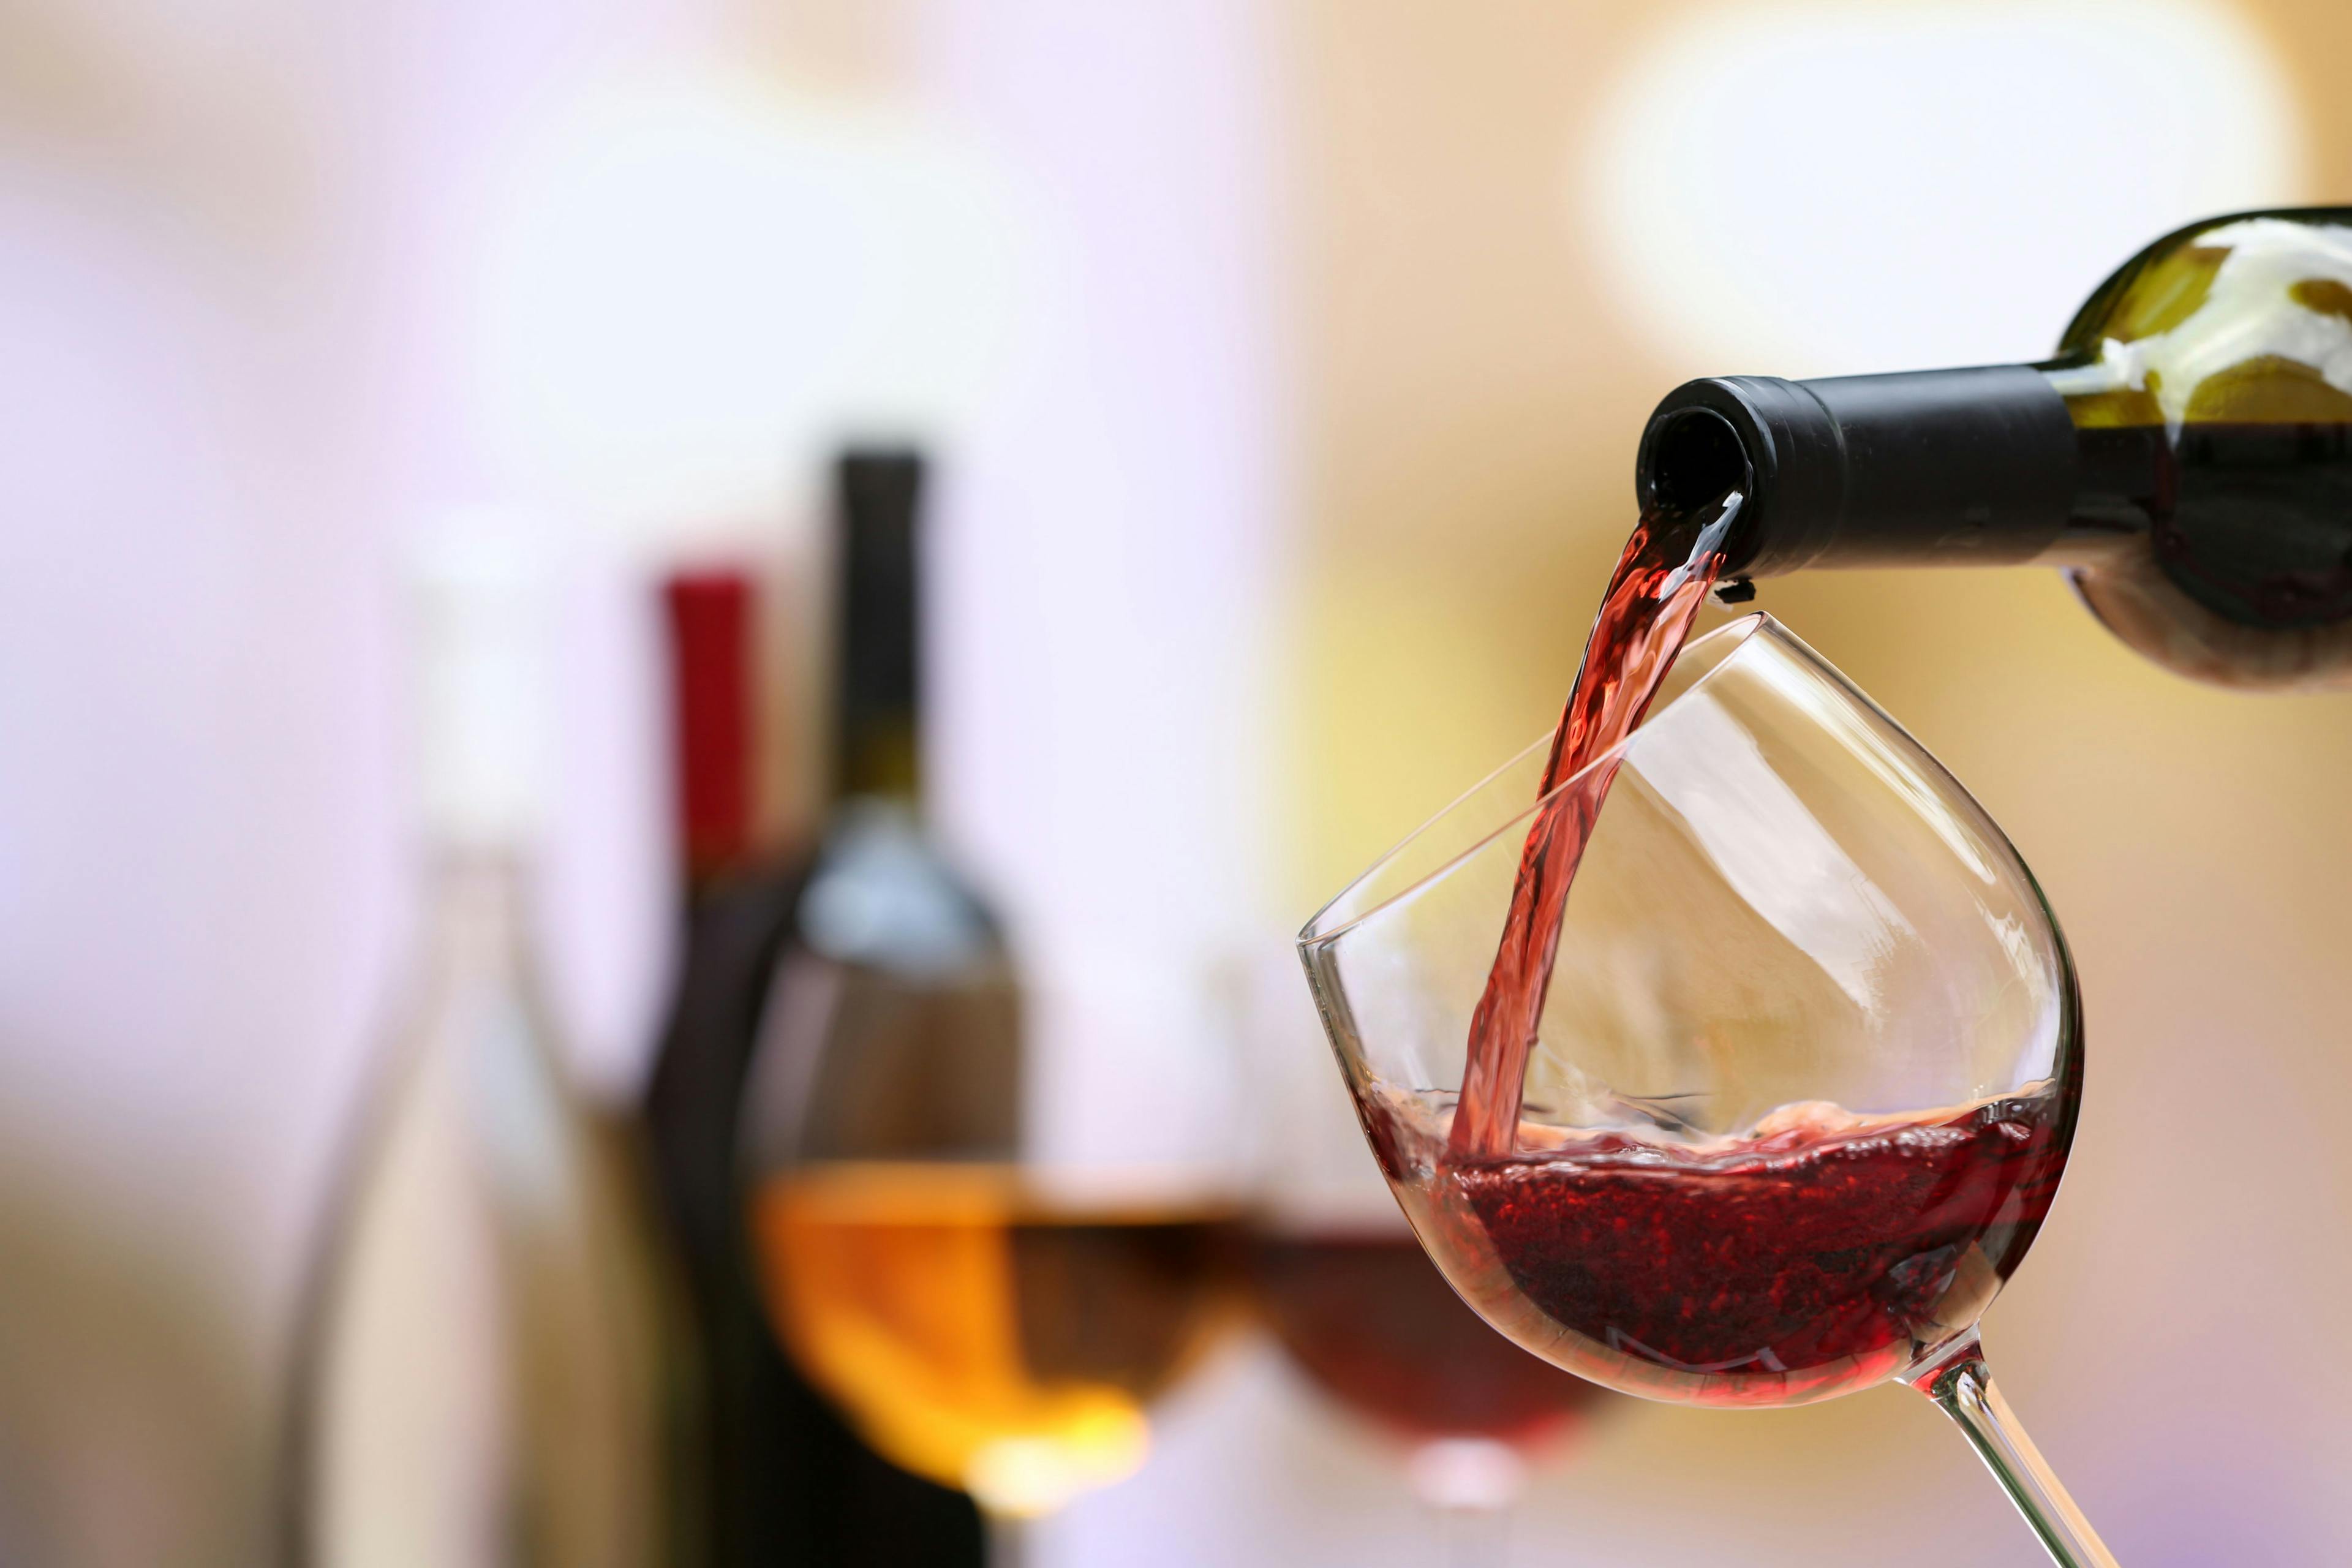 Red wine pouring into wine glass, close-up | Image Credit: © [ Africa Studio - stock.adobe.com